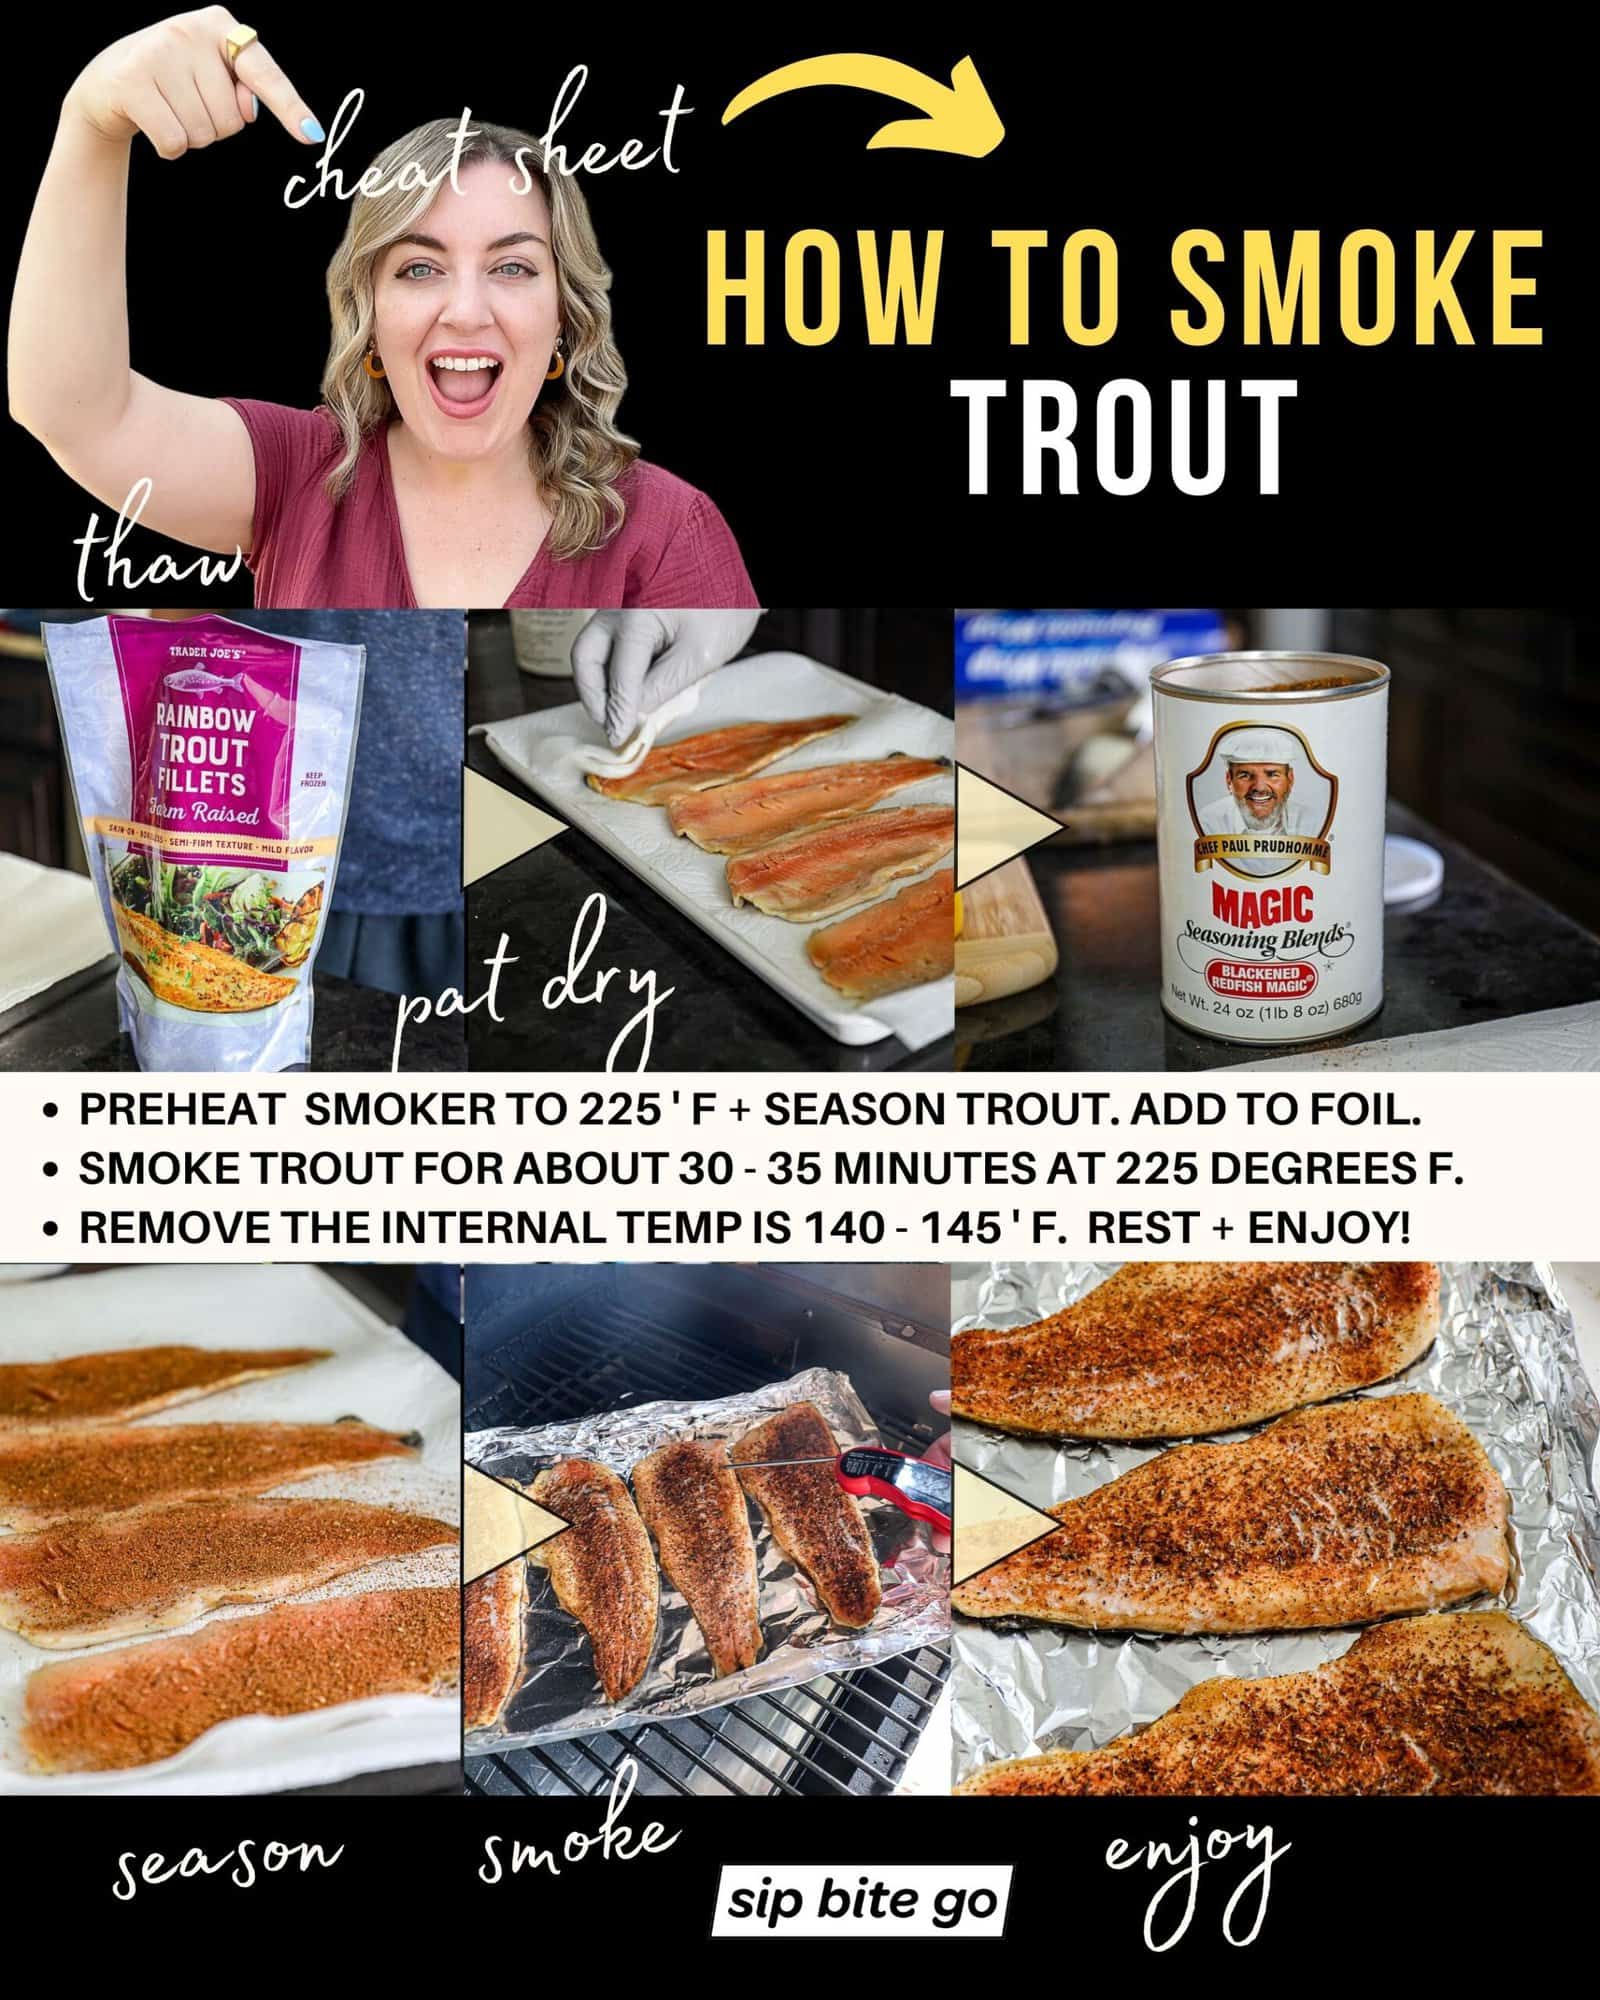 Infographic with detailed recipe steps for smoking trout filets on the Traeger pellet grill with Jenna Passaro from Sip Bite Go